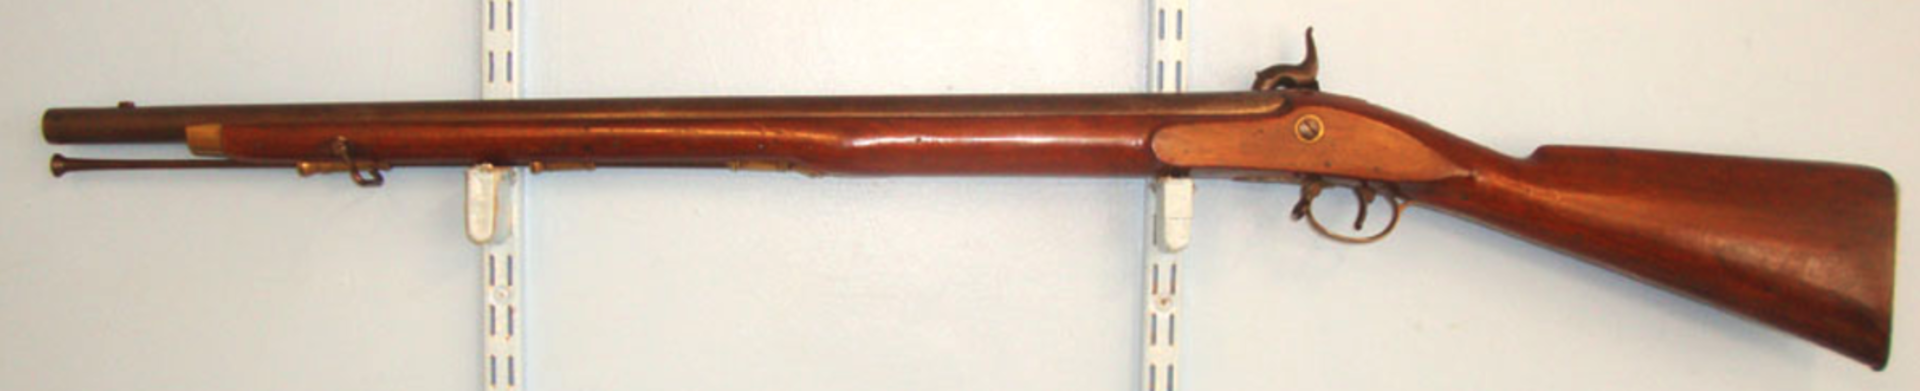 SUPERB, Early 1800’s Thomas Richards Bristol, British Officer's Percussion .750 Smooth Bore Musket - Image 2 of 3